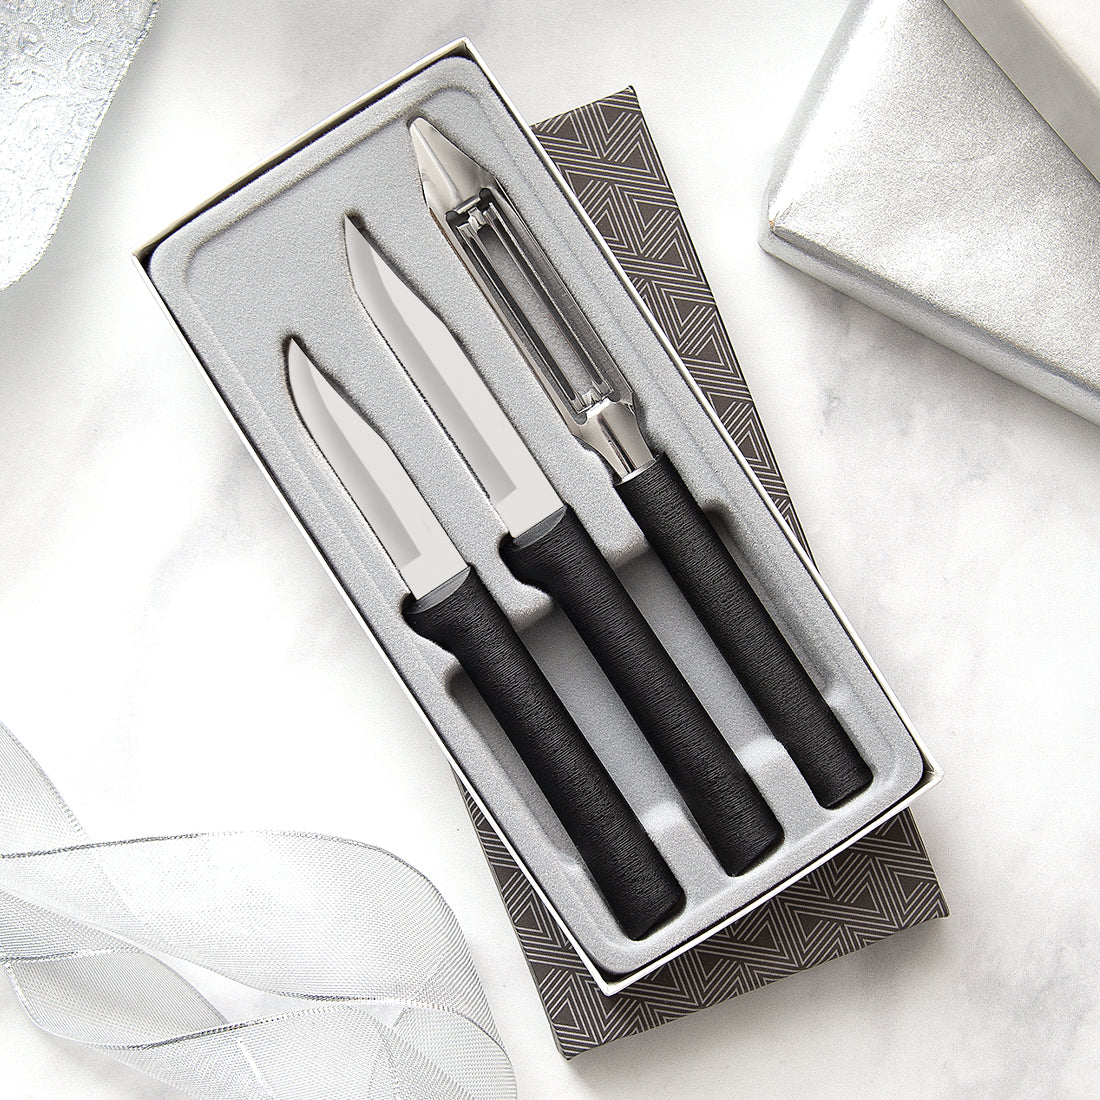 Rada Cutlery S48 The Starter Knife Gift Set Part 2, Silver Handle